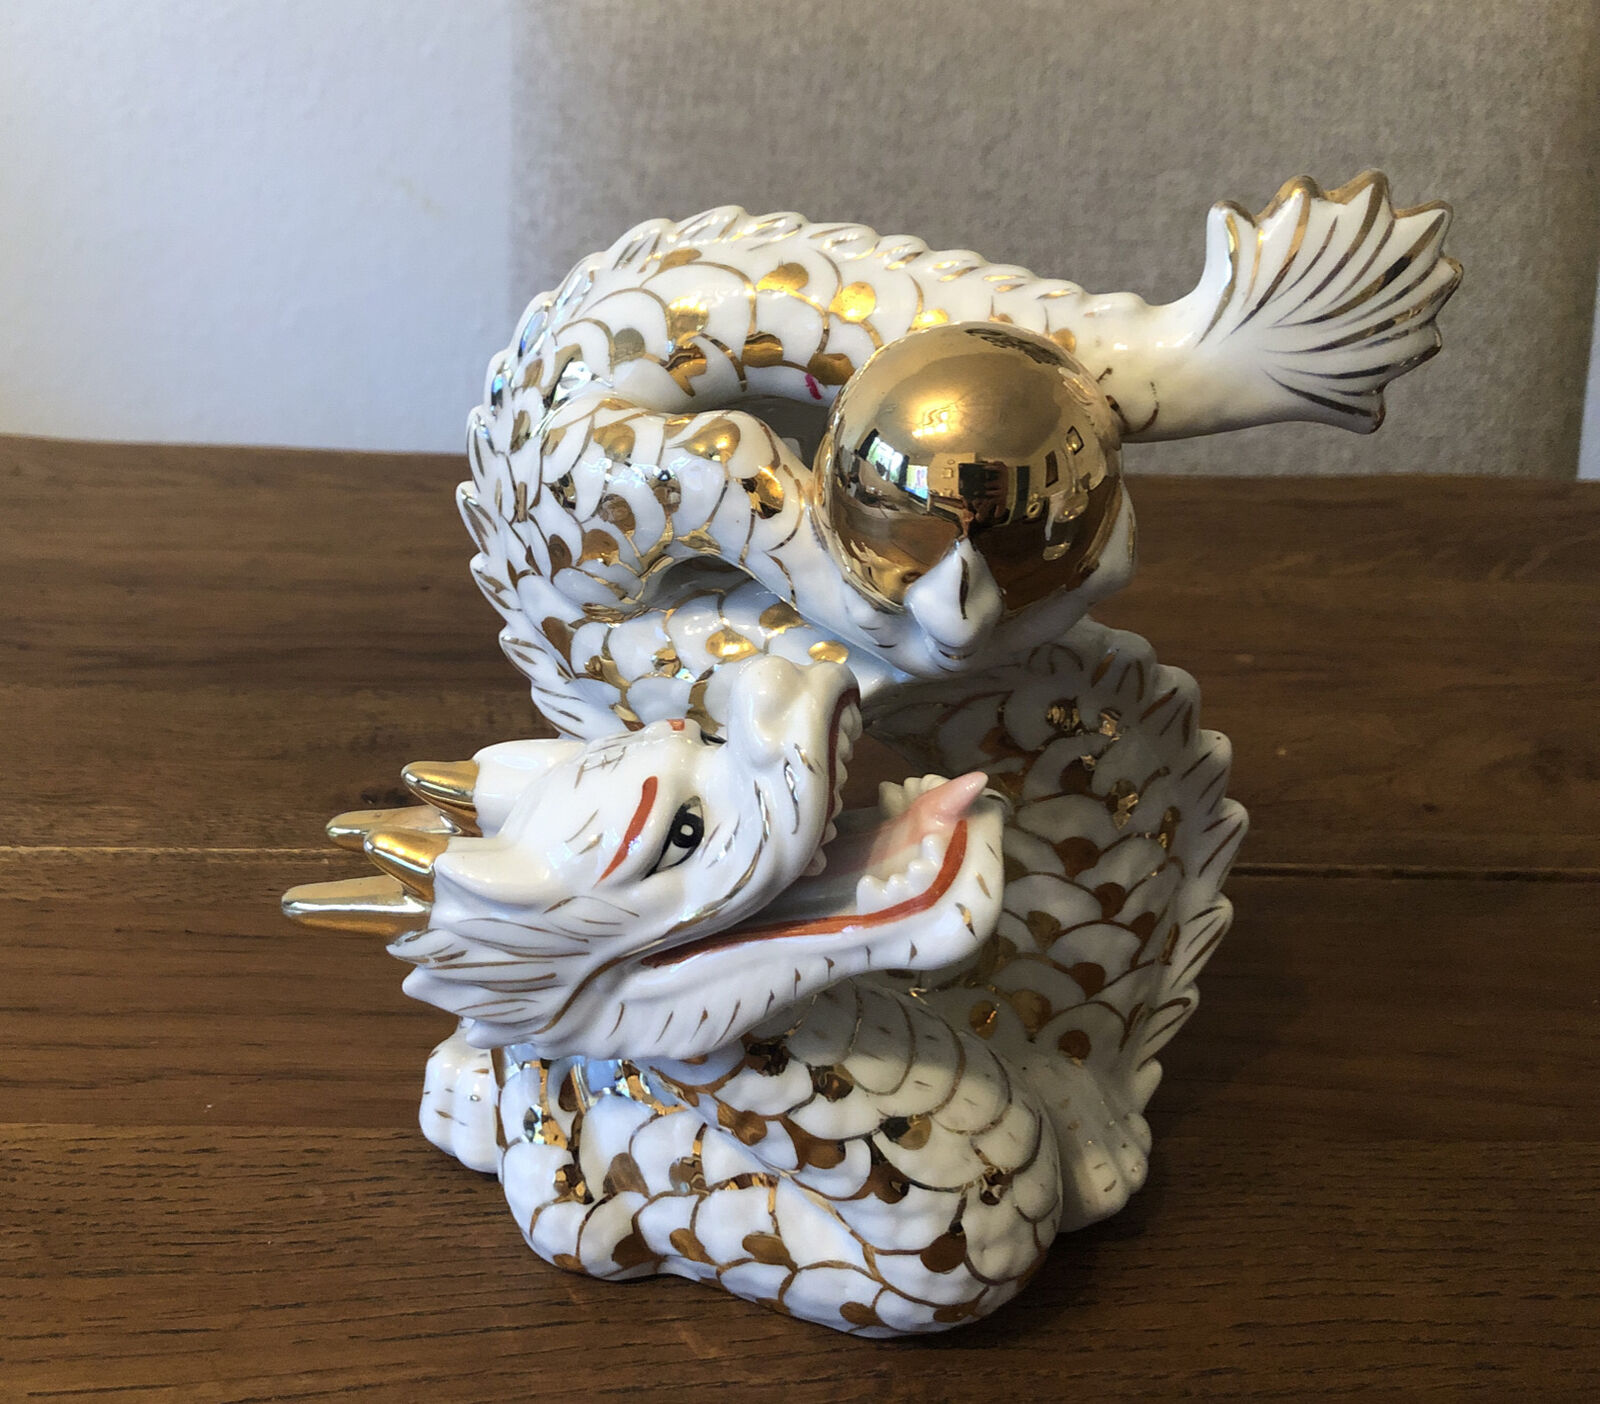 Antique Valuations: Porcelain Feng Shui Dragon Holding Ball White & Gold figurine Unmarked H: 19 Cm